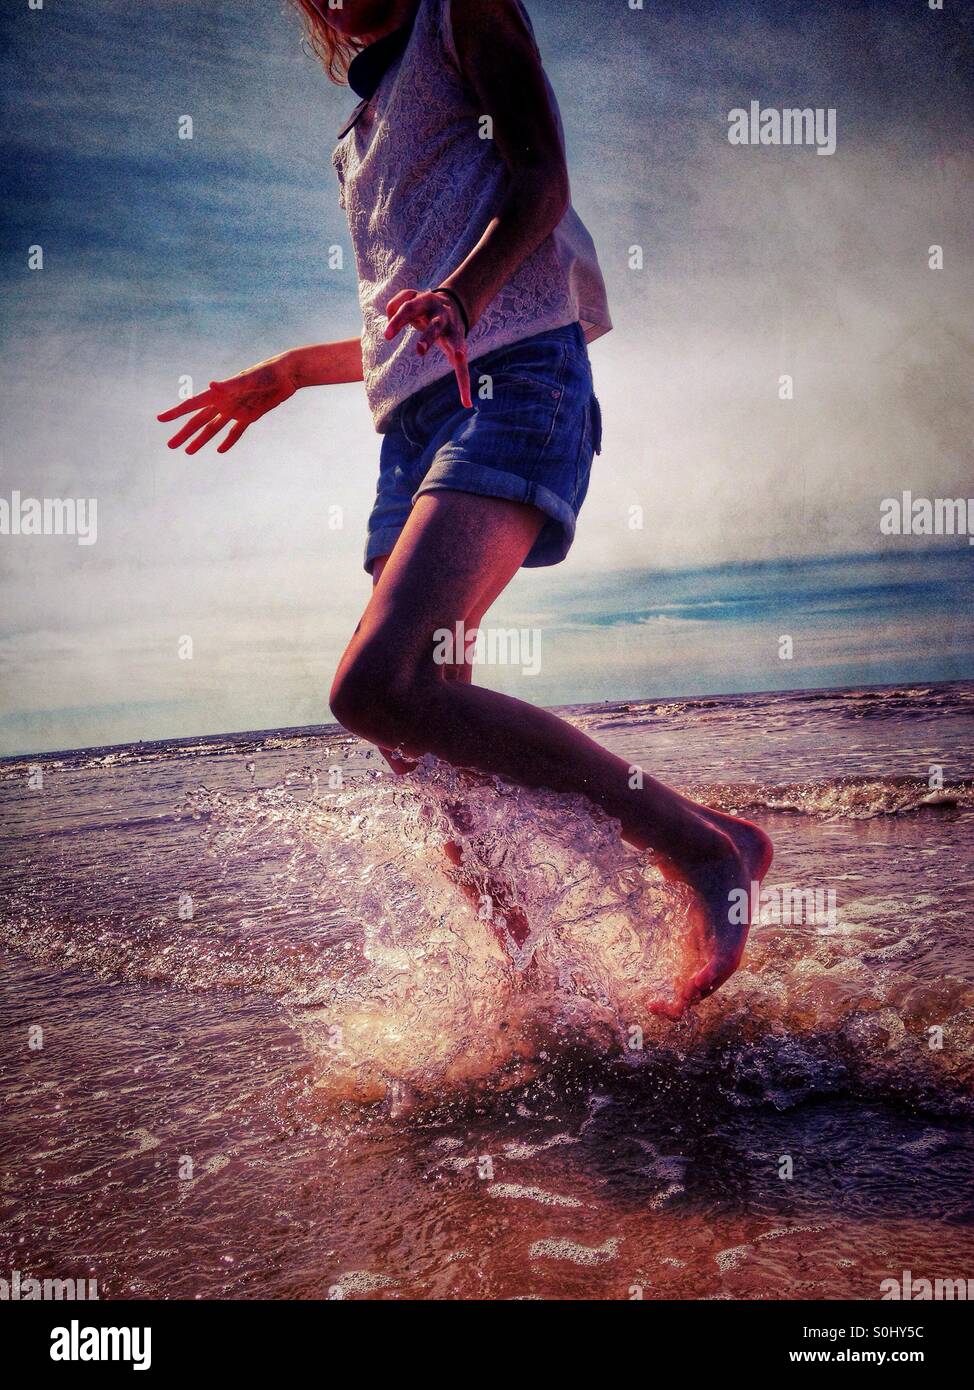 Young Girl splashing in sea Banque D'Images